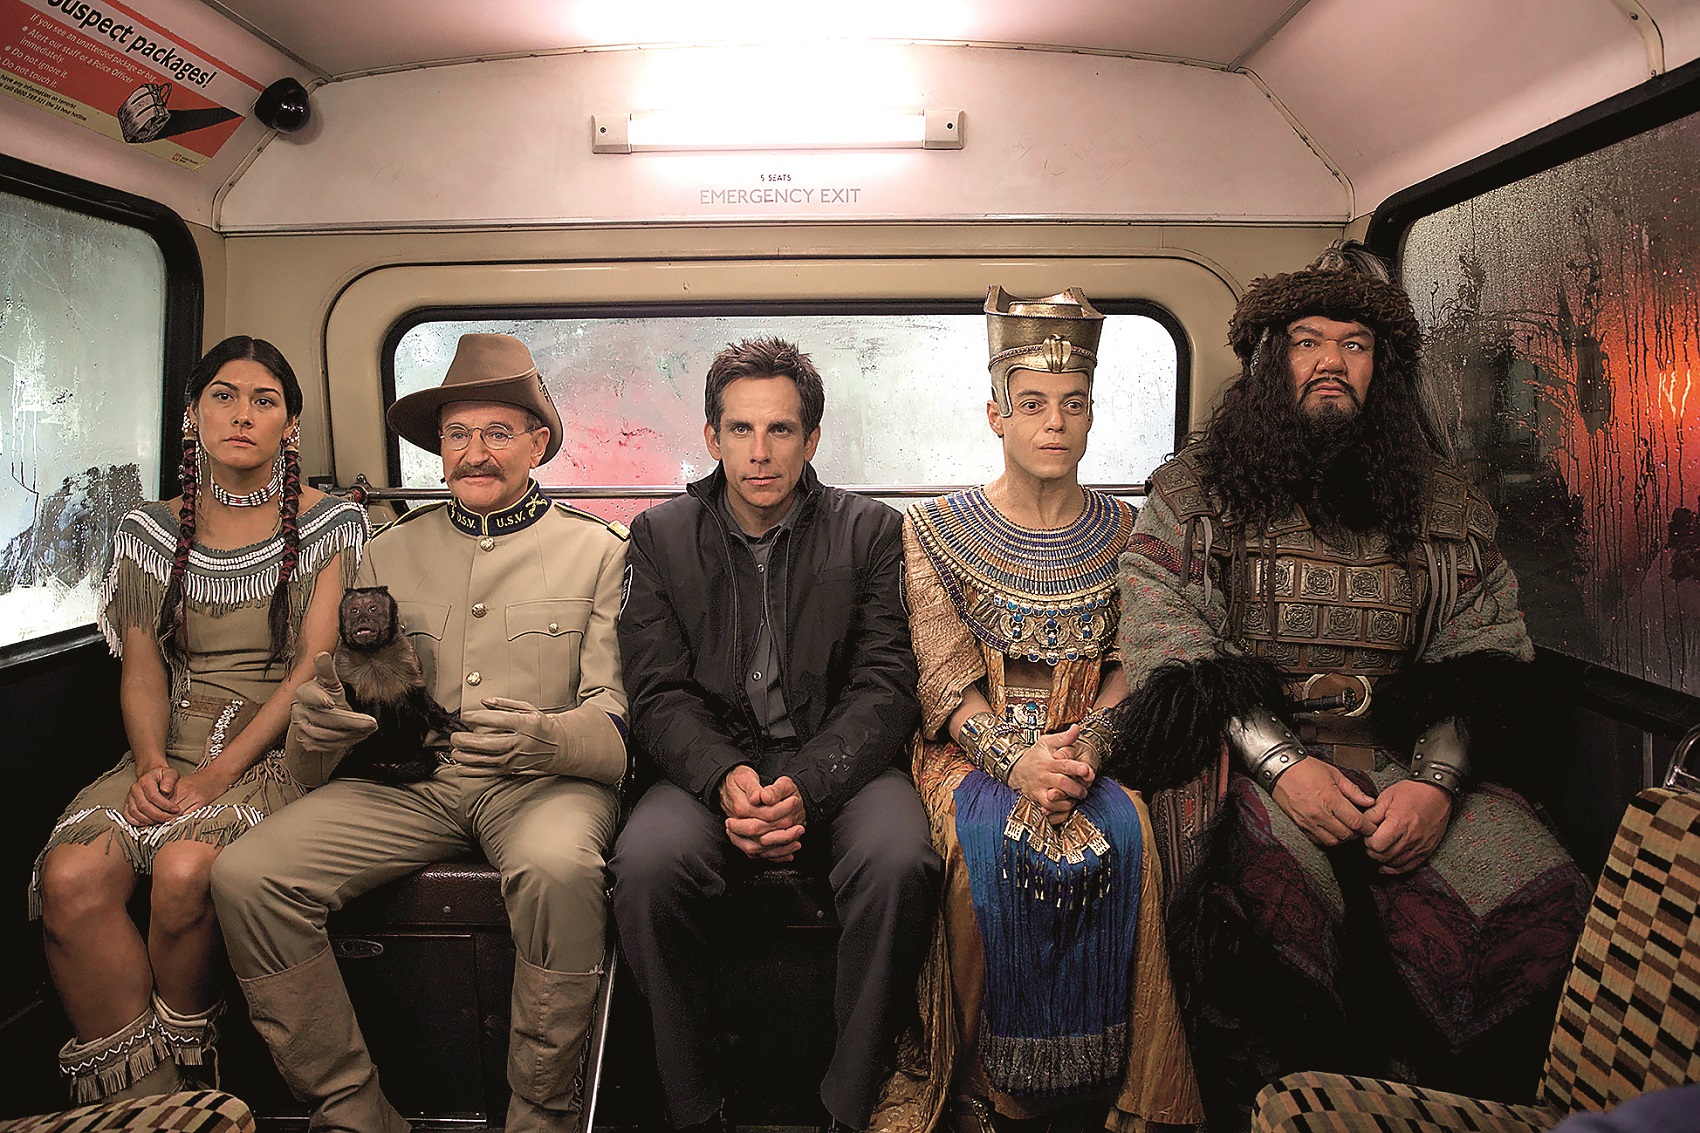 La nuit au musee  Le secret des pharaons
Night at the Museum 3 Secret of the Tomb
2015
Real  Shawn Levy
Ben Stiller
Robin Williams
Patrick Gallagher
Mizuo Peck
Rami Malek.
Collection Christophel © 21 Laps Entertainment / 1492 Pictures,Image: 348726155, License: Rights-managed, Restrictions: Restricted to editorial use related to the film or the individuals involved (producers, directors, authors, actors, etc.)
The rights of publicity of any person depicted in the photos are not granted
Mandatory credit of the film company and photographer, Model Release: no, Credit line: 21 Laps Entertainment / 1492 Pic / AFP / Profimedia